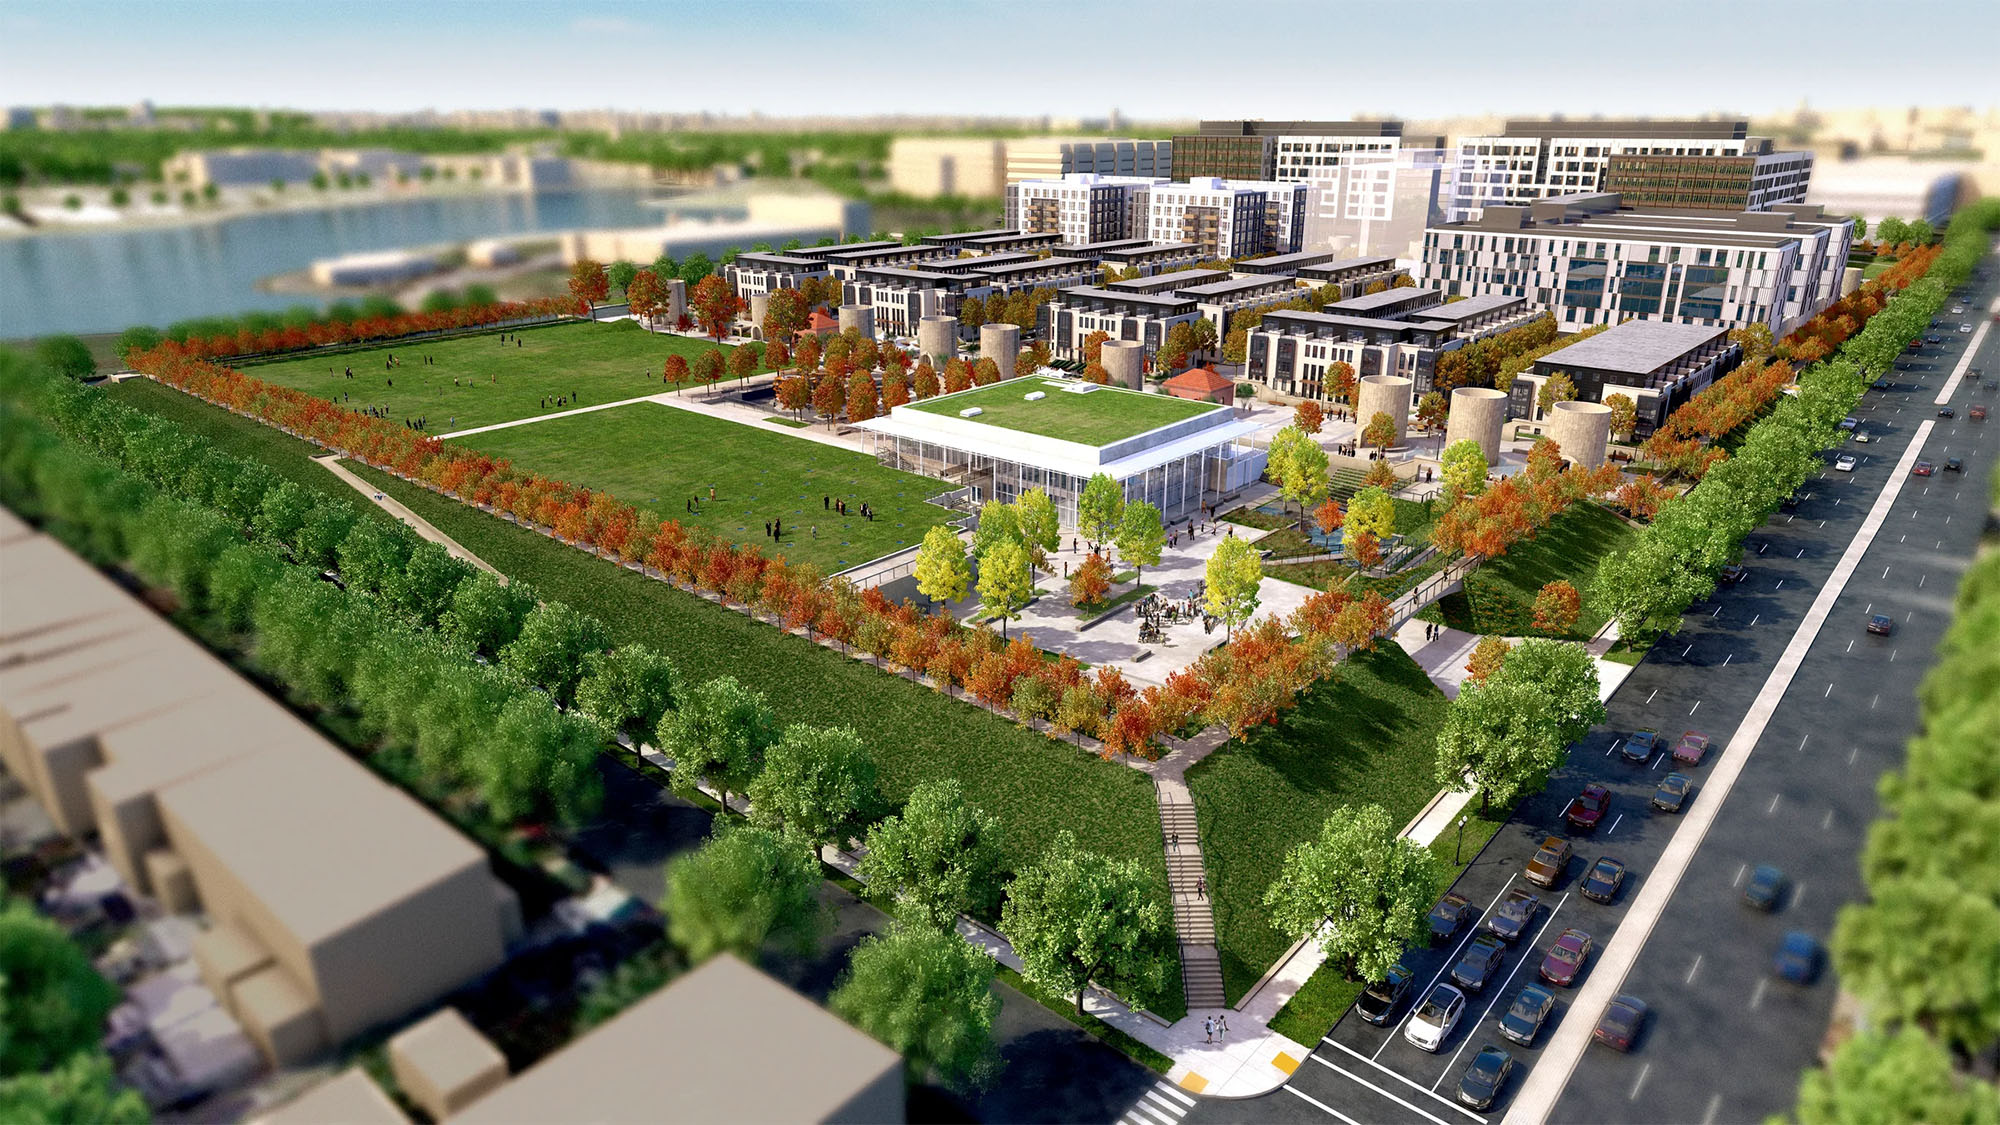 A rendering of the anticipated Reservoir District, built on the former McMillan sand filtration site in Northwest Washington, DC 